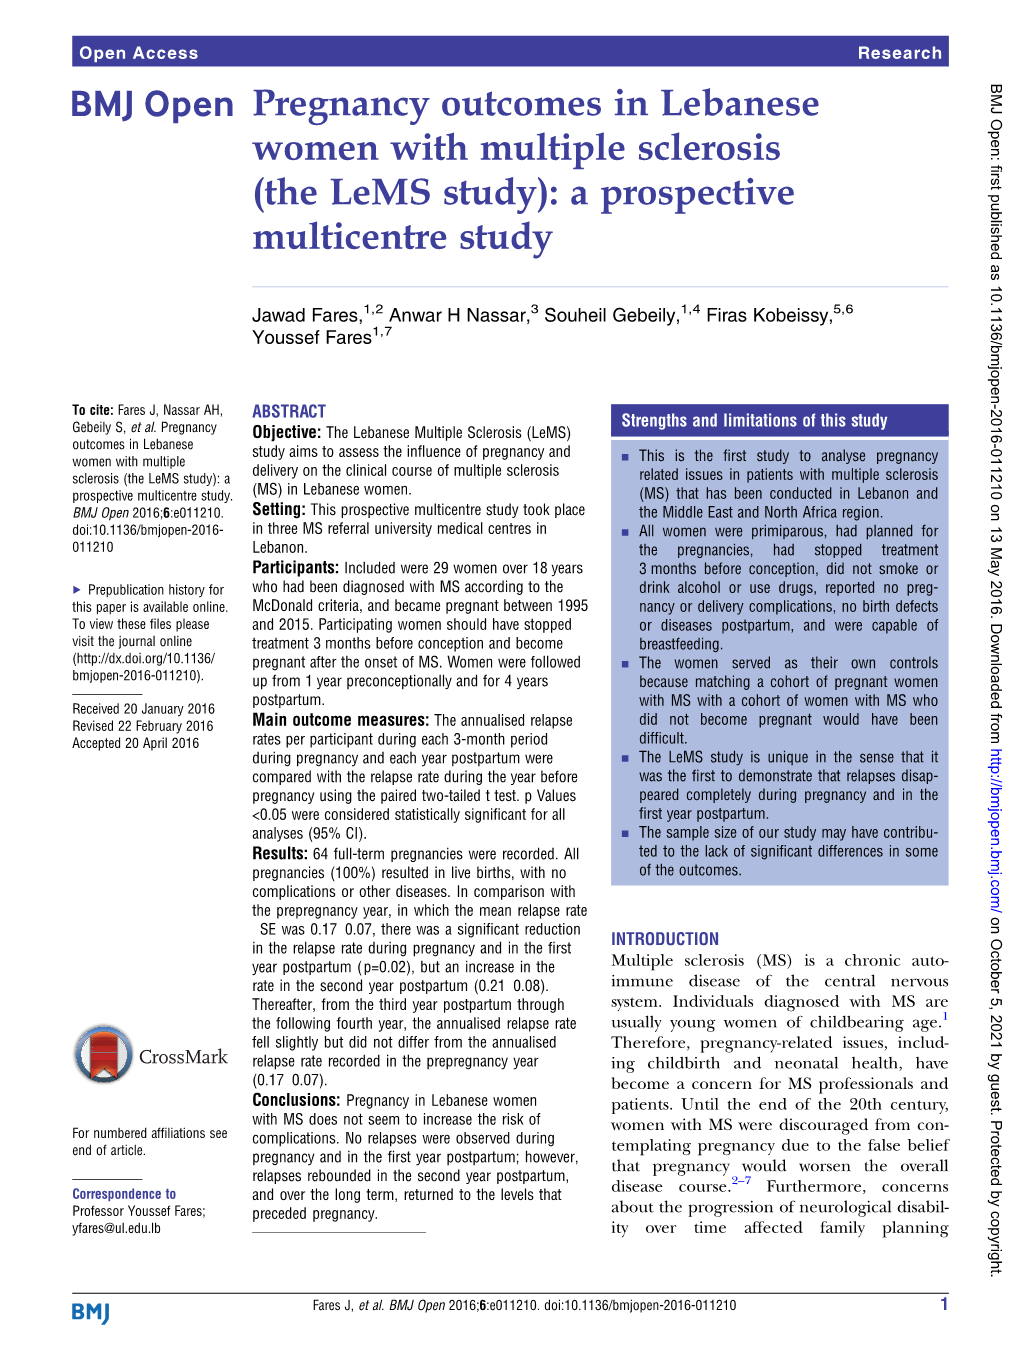 Pregnancy Outcomes in Lebanese Women with Multiple Sclerosis (The Lems Study): a Prospective Multicentre Study